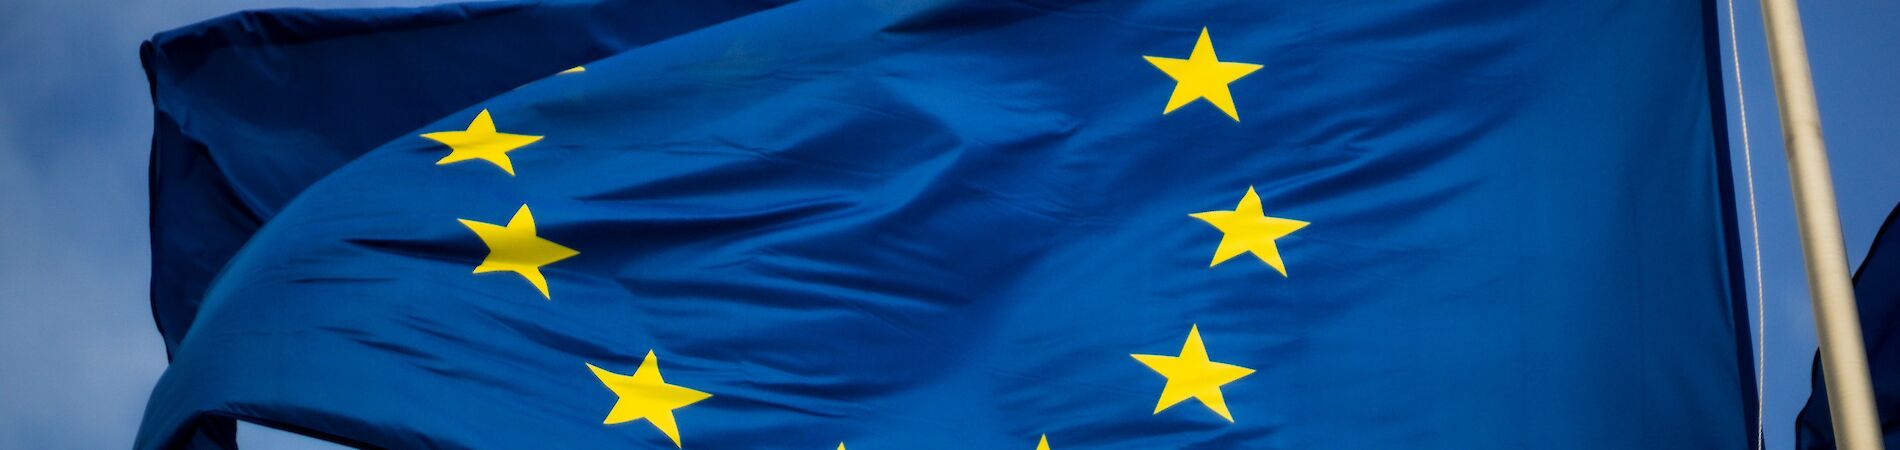 Flag of the European Union waving in blue sky